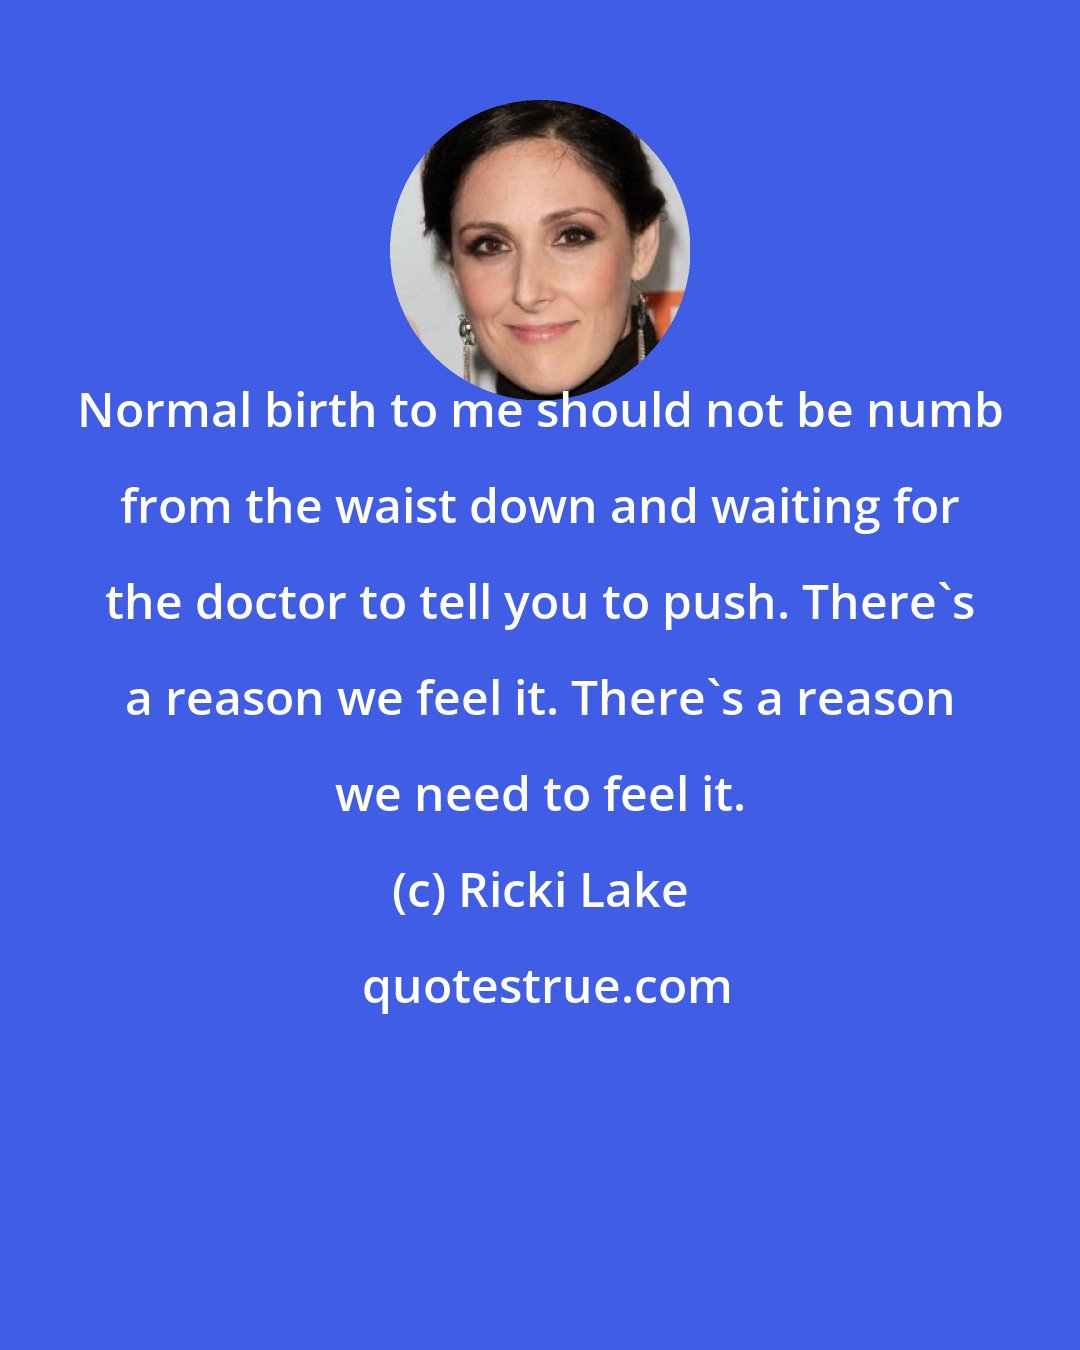 Ricki Lake: Normal birth to me should not be numb from the waist down and waiting for the doctor to tell you to push. There's a reason we feel it. There's a reason we need to feel it.